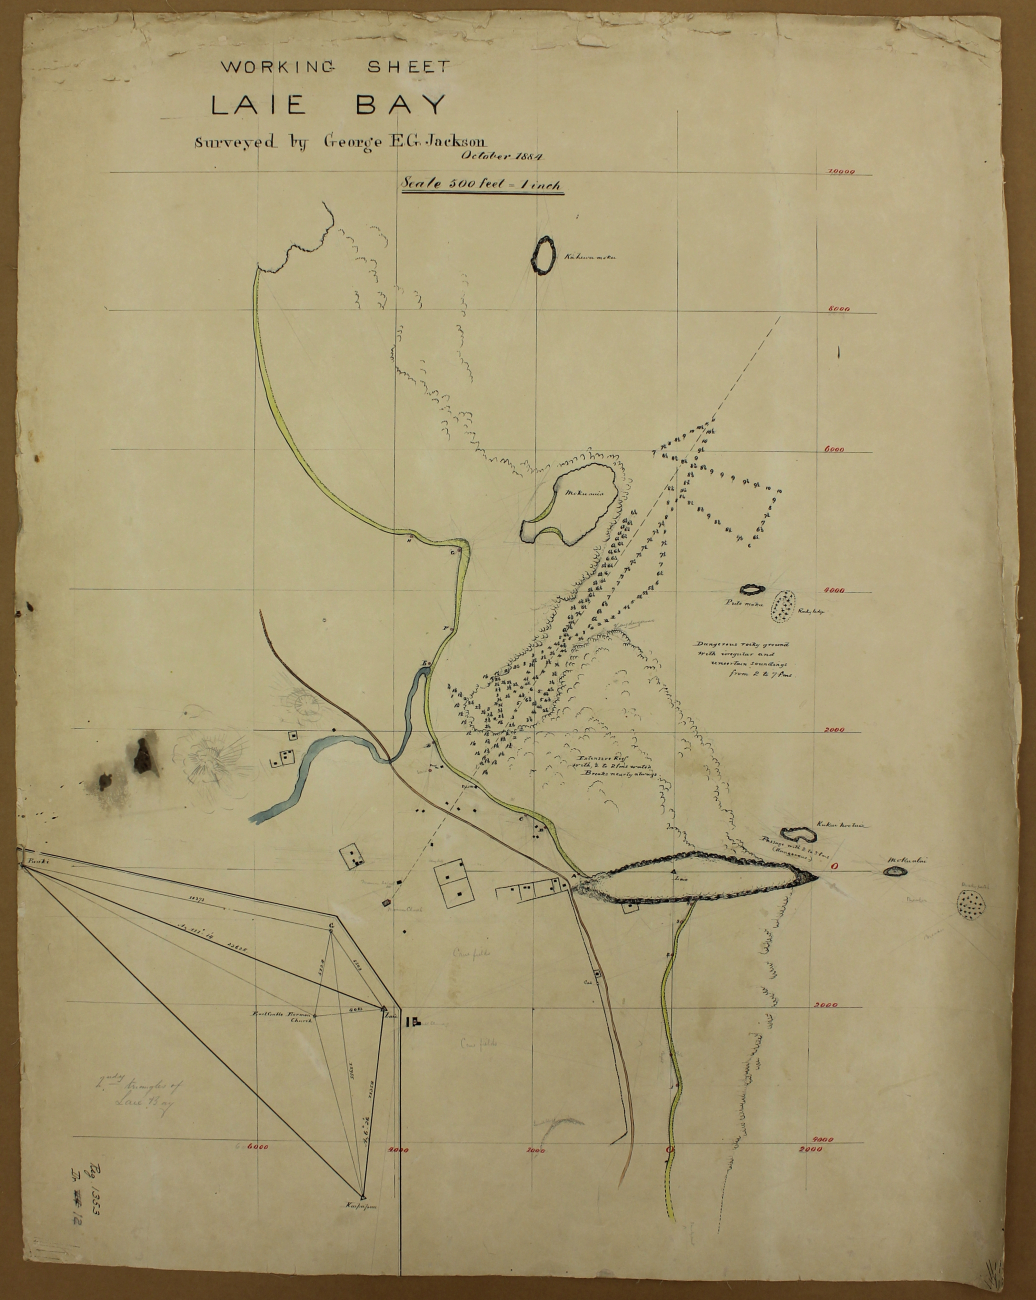 Hydrographic survey of Laie Bay by George E